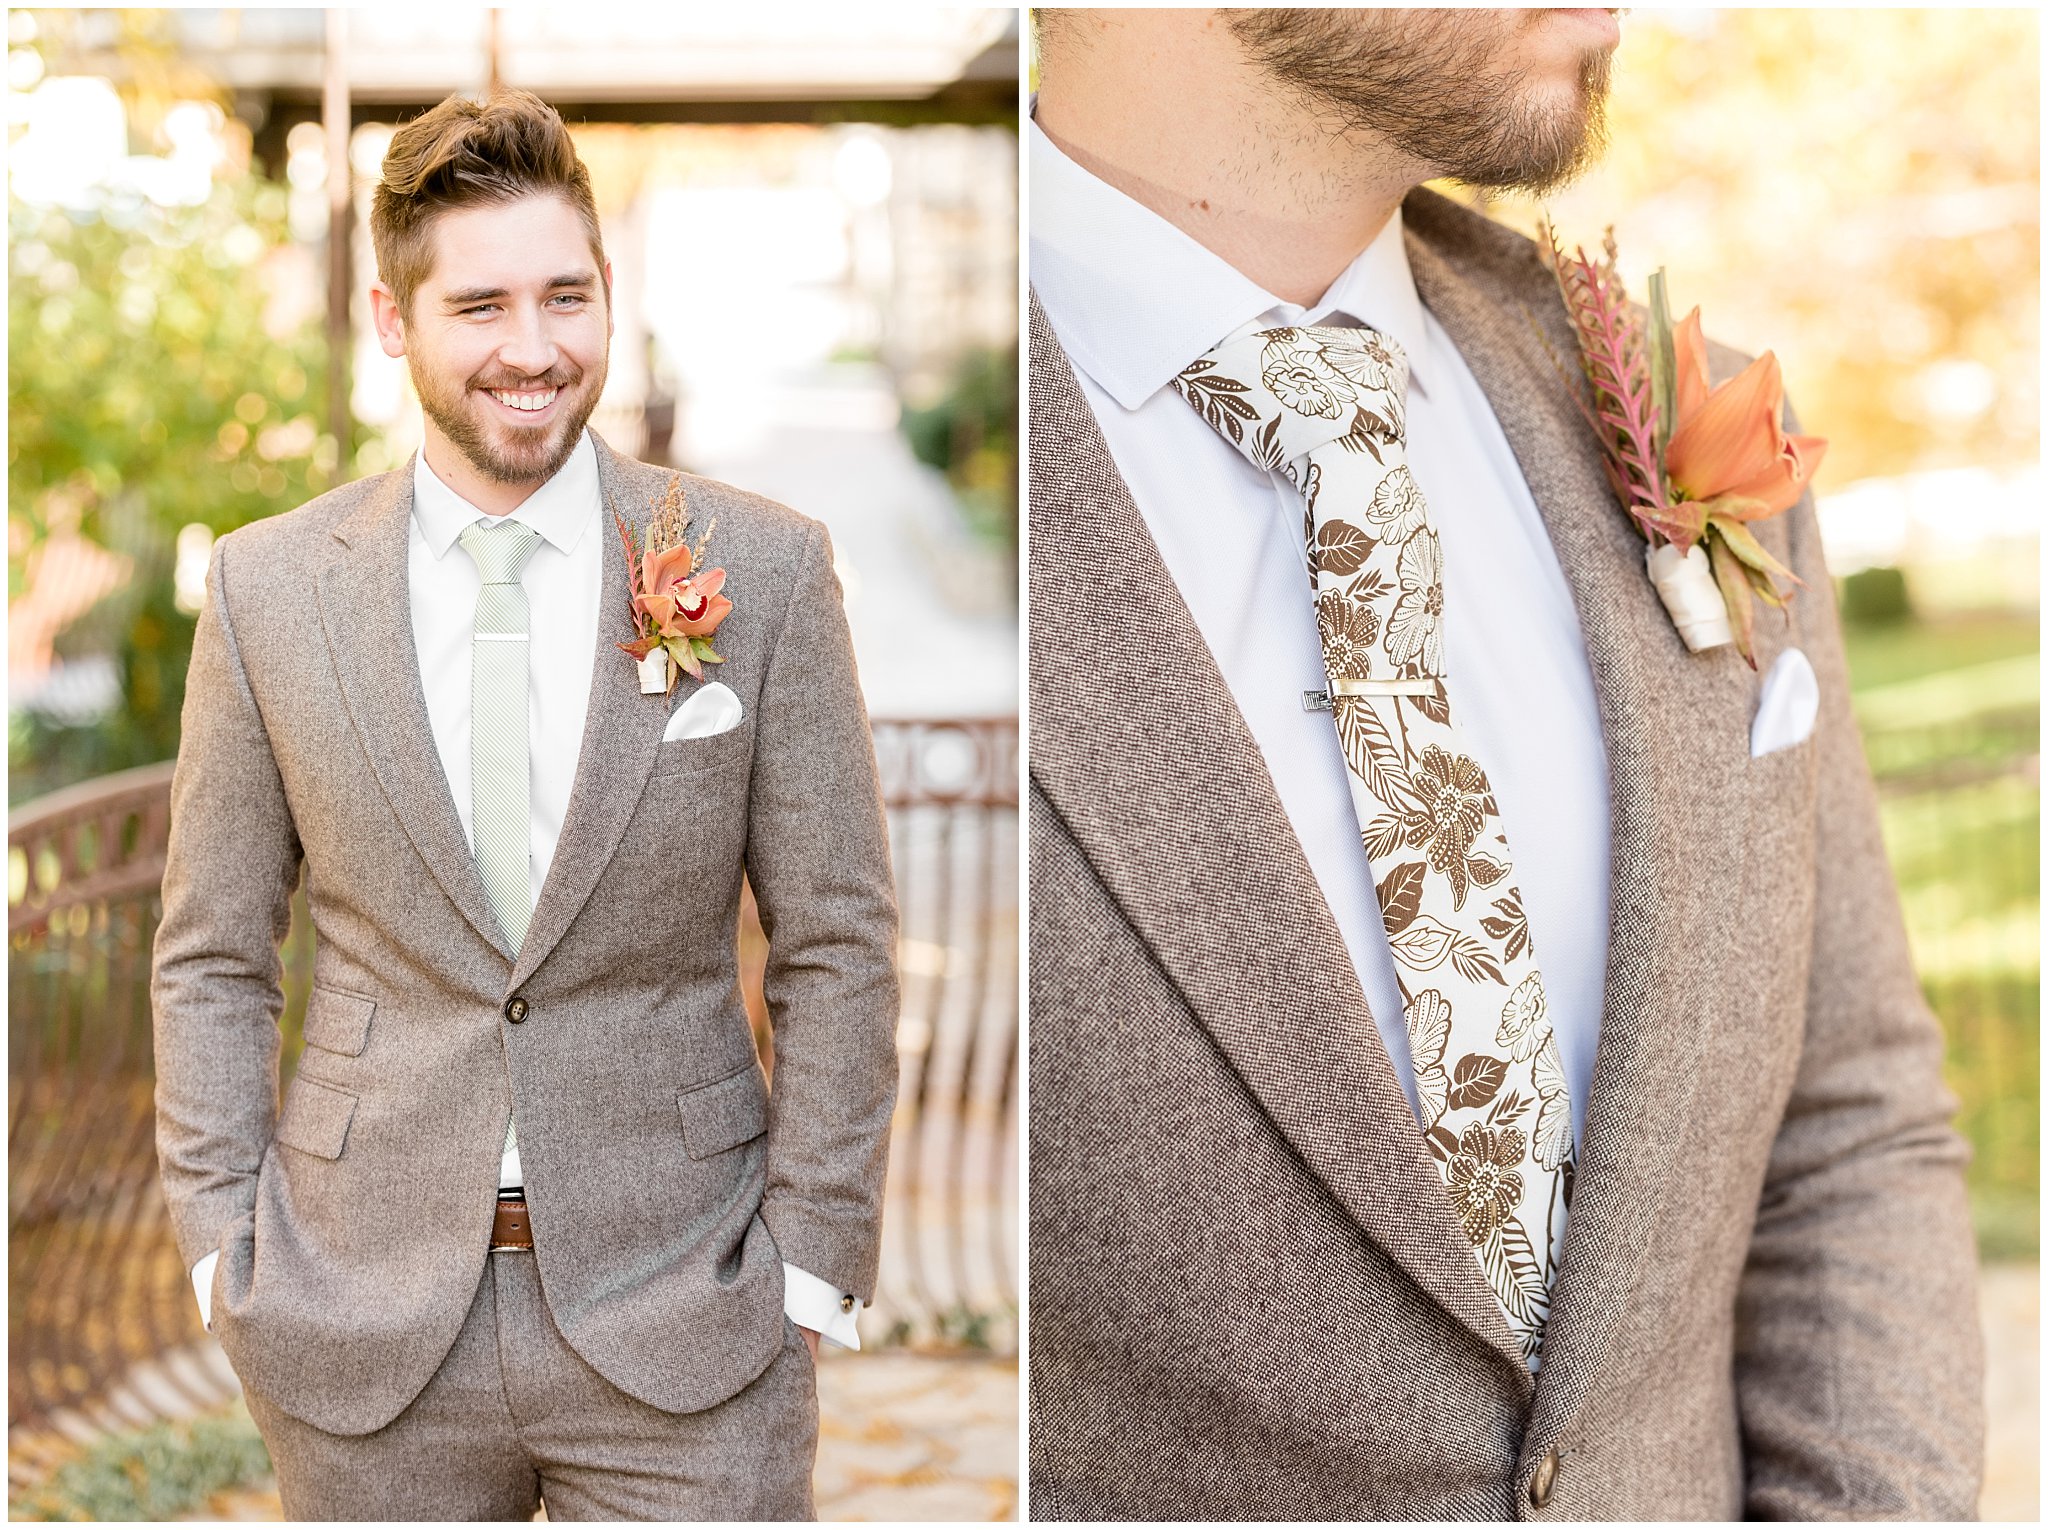 Groom in custom fit light brown suit and fall brown leaf tie | Wadley Farms Elegant Utah Wedding | Jessie and Dallin Photography